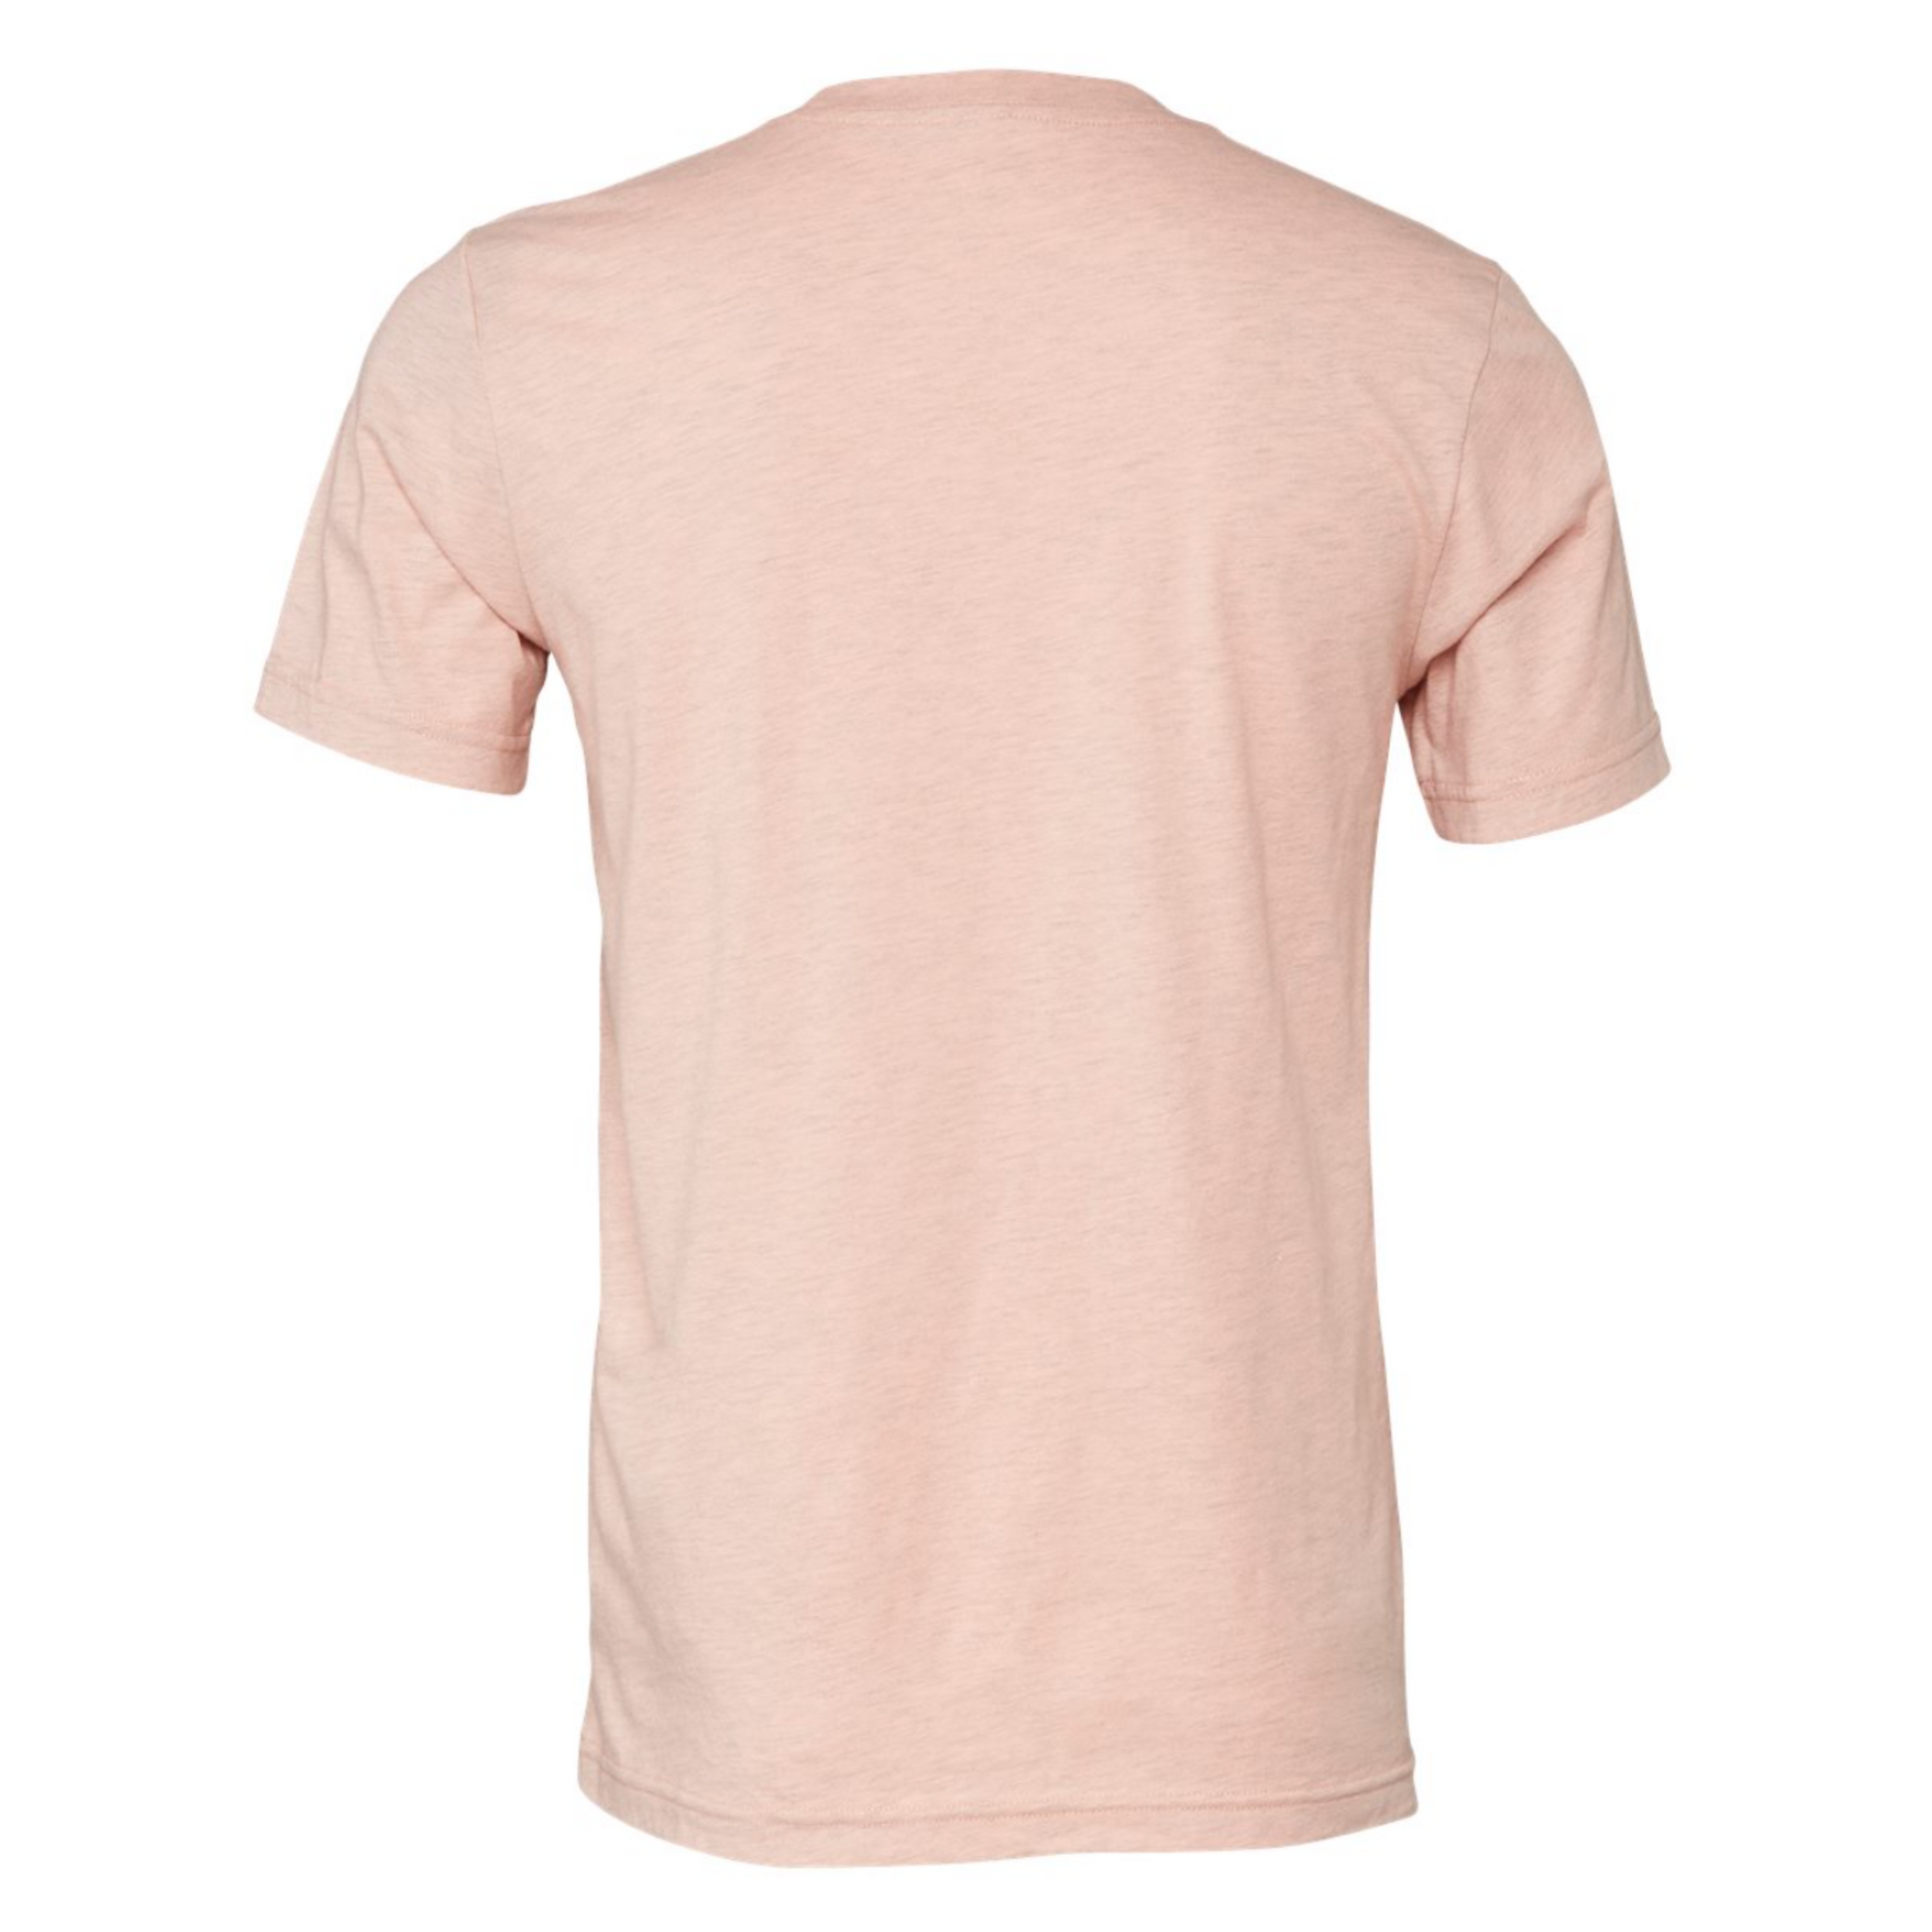 Mama - T-Shirt in heather prism peach. Mama is in a black design with an arrow below it pointing to the right. This is the back view of the t-shirt.